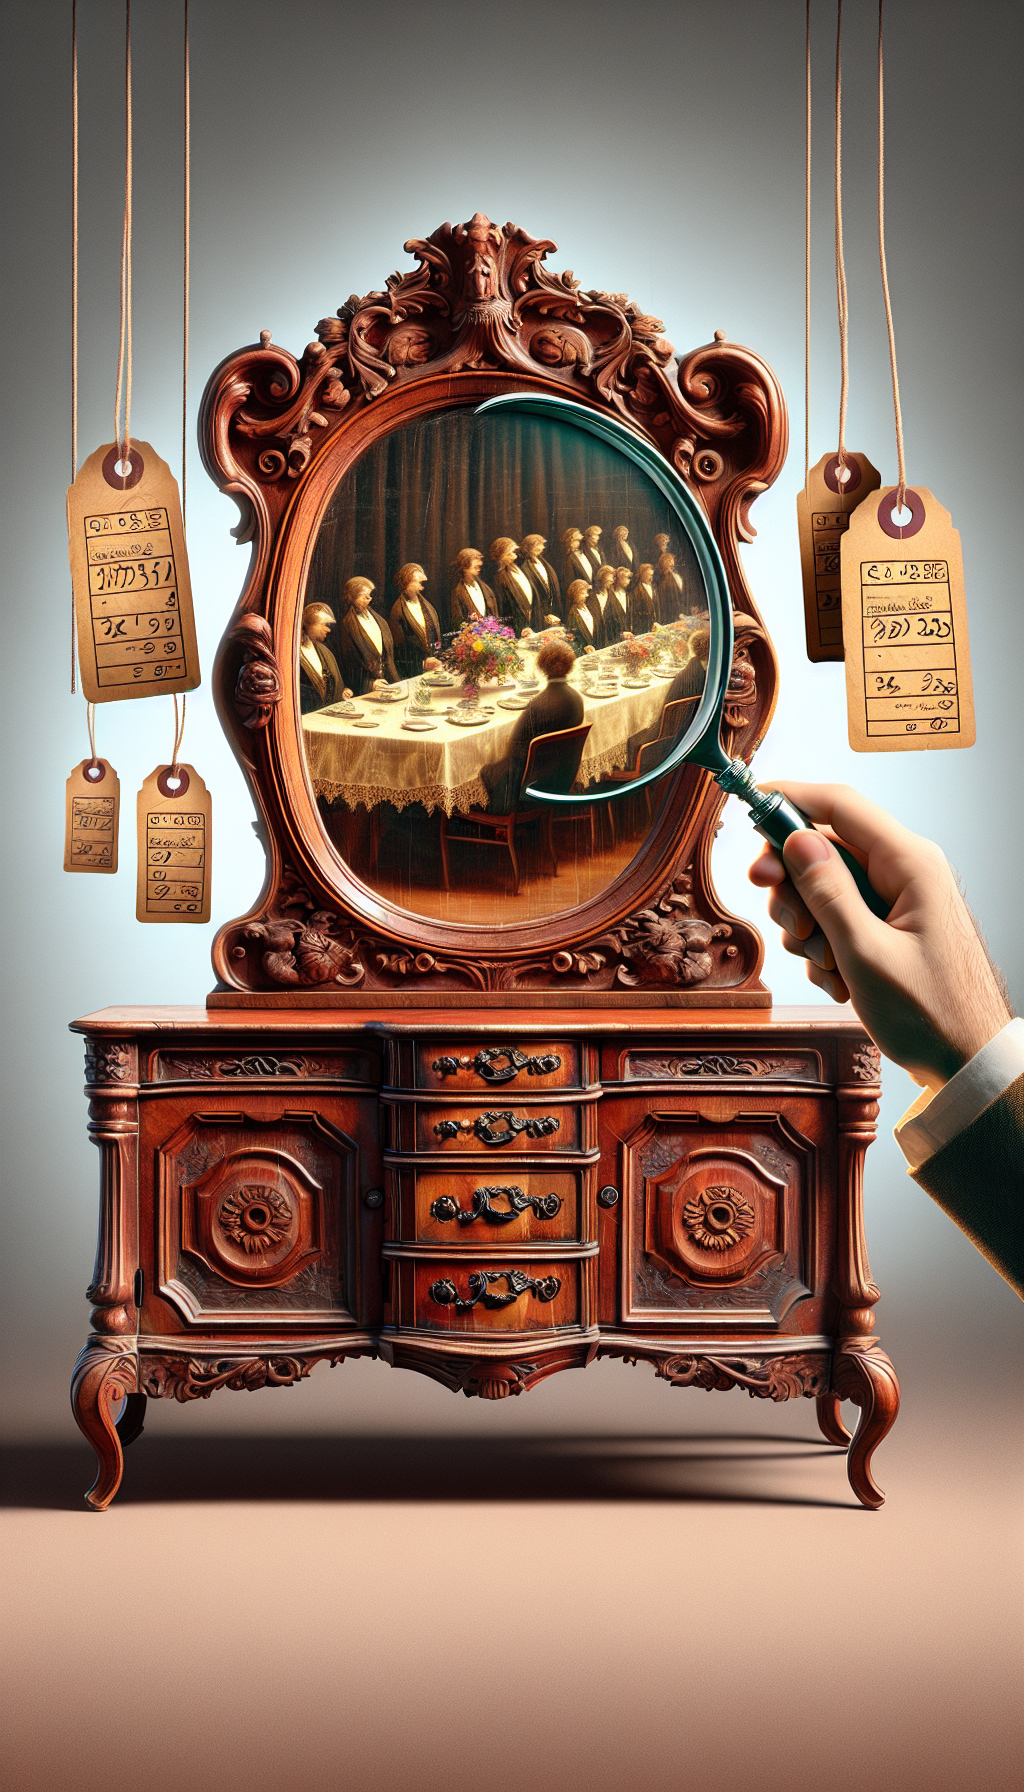 An ornate antique sideboard reflects a ghostly, faded image of its own past—a bustling Victorian dining room scene. A magnifying glass hovers above, scrutinizing a telltale maker's mark on the furniture, while price tags with increasing values dangle off the carved wooden mirror frame, symbolizing the sideboard's rising worth with age and authenticity.